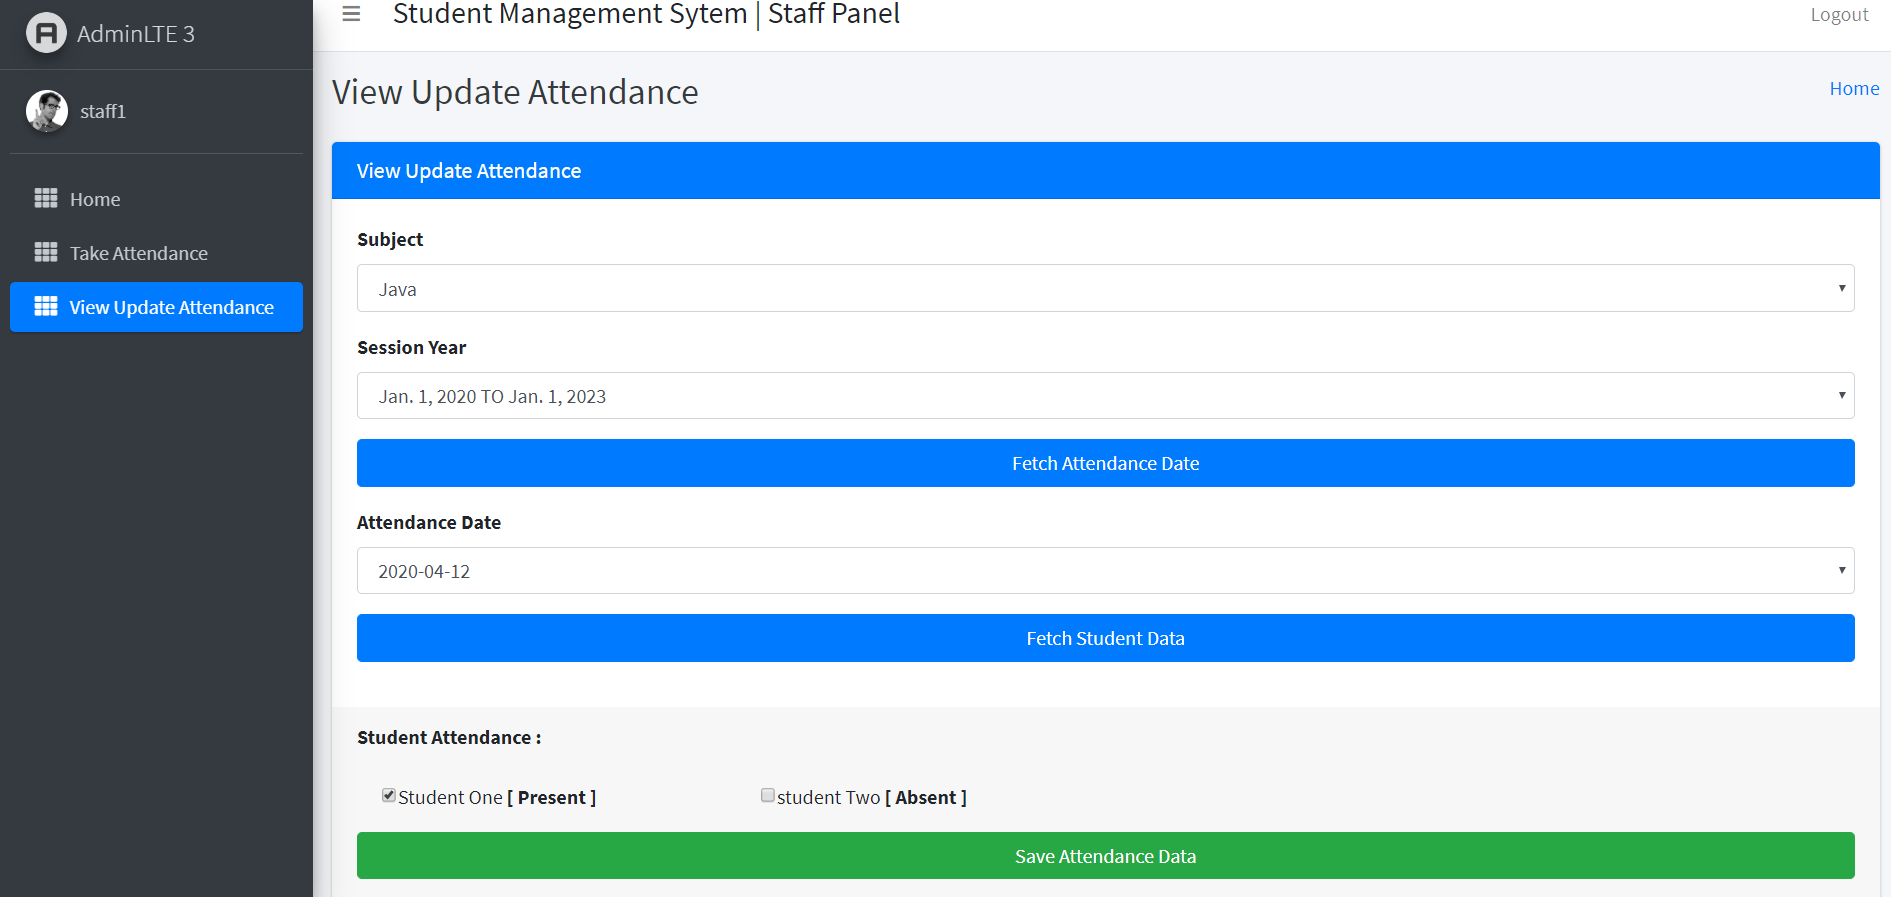 Staff View and Update Attendance Page